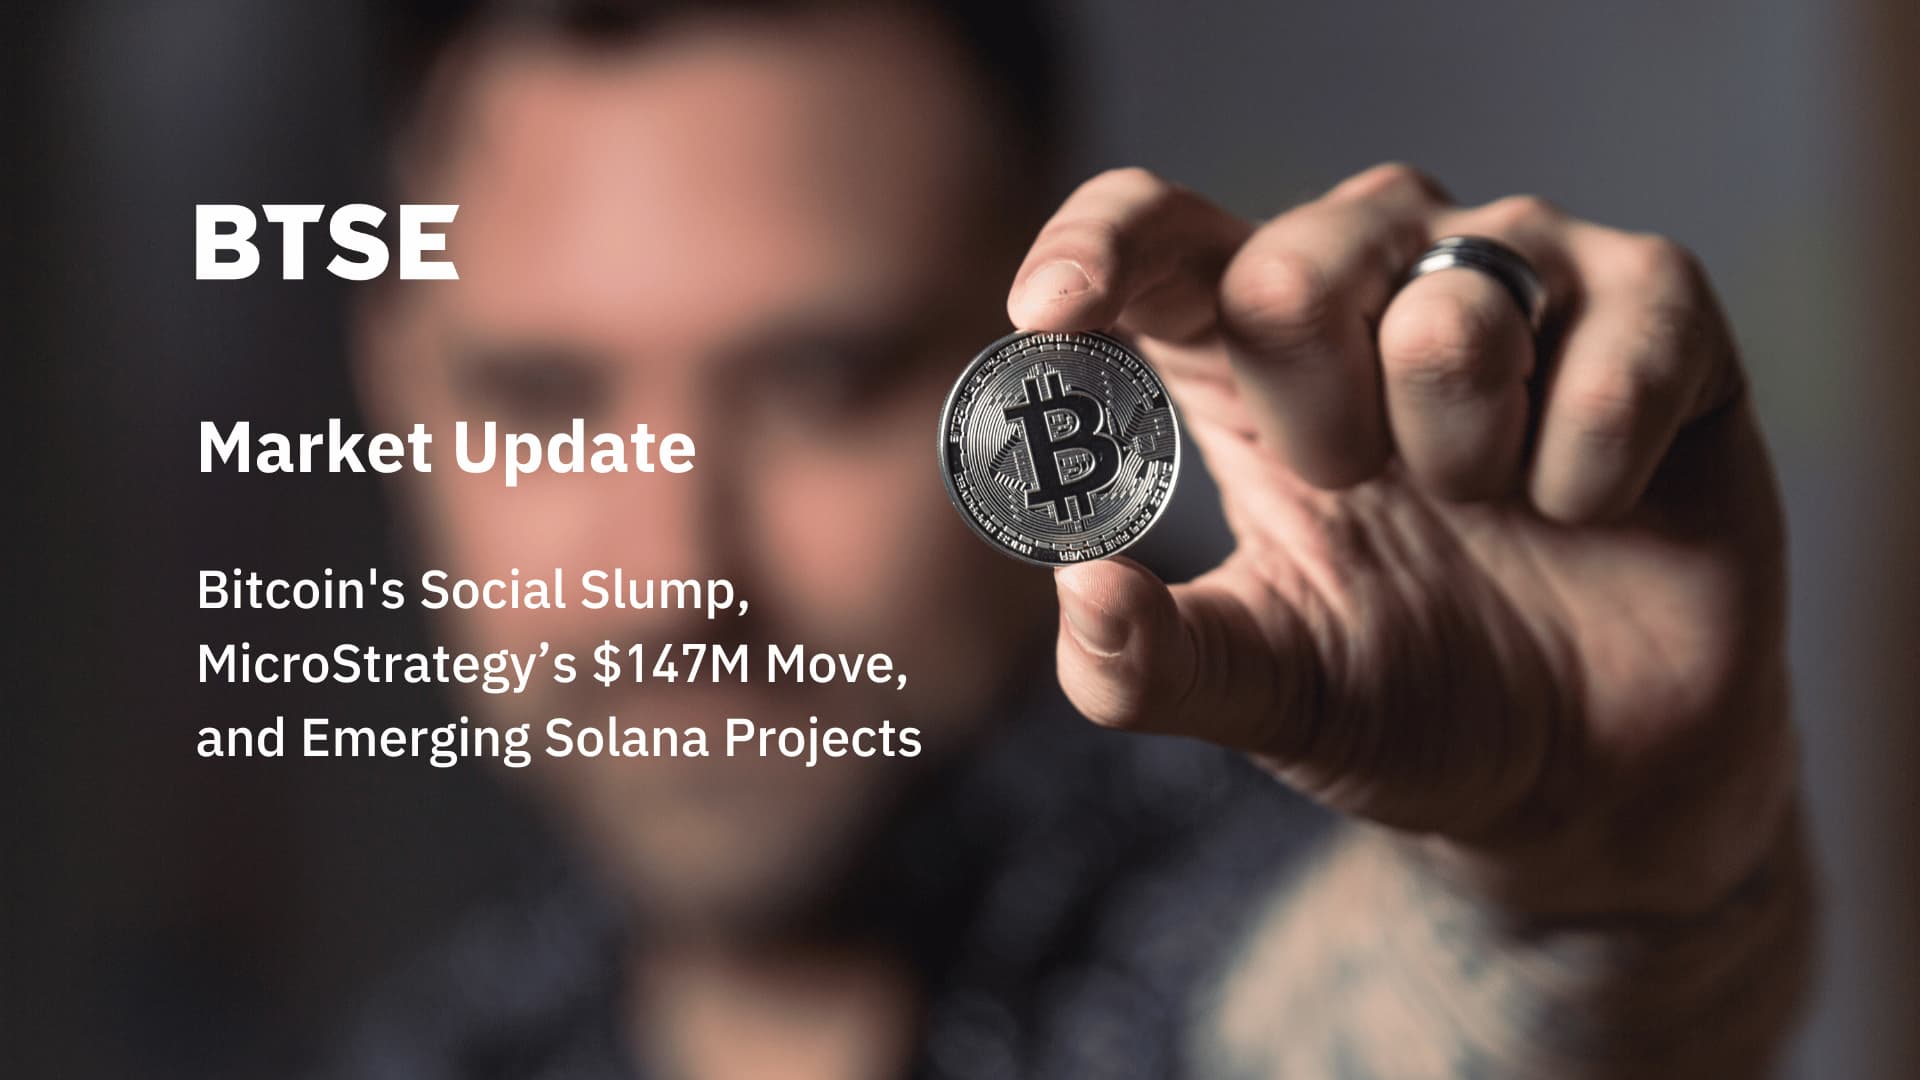 Bitcoin’s Social Slump, MicroStrategy’s $147M Move, and Emerging Solana Projects